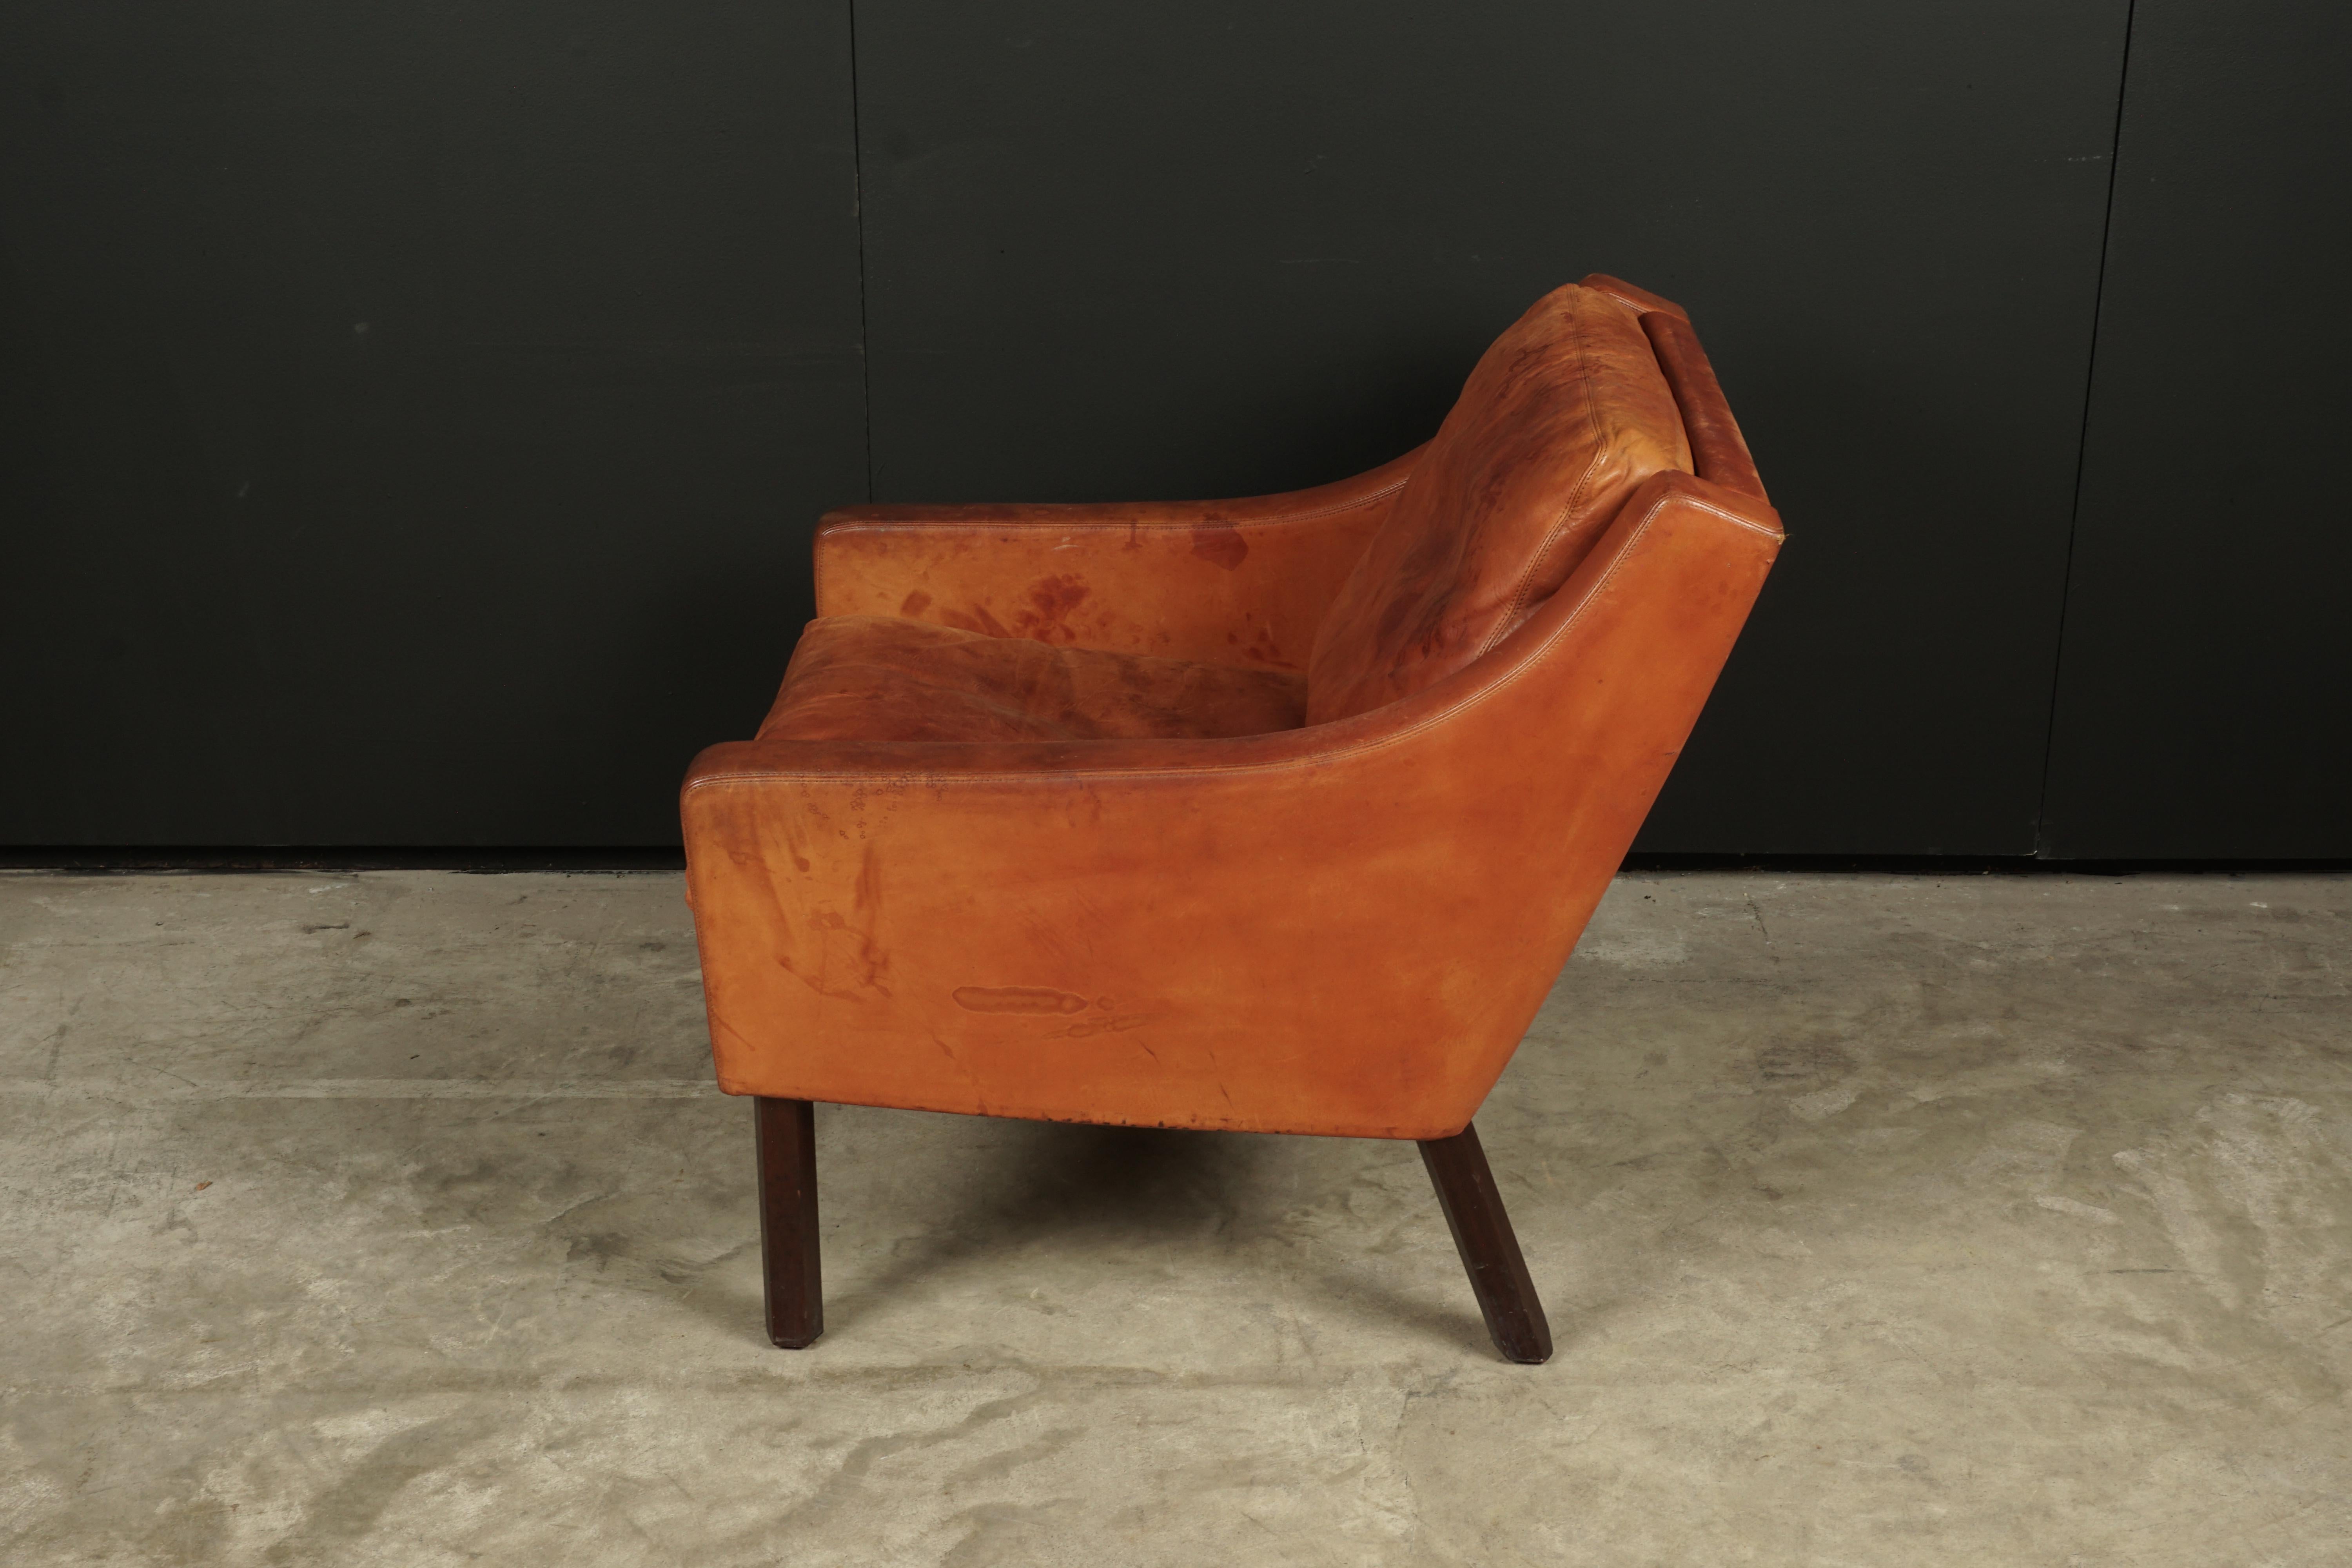 European Vintage Midcentury Leather Lounge Chair from Denmark, circa 1970